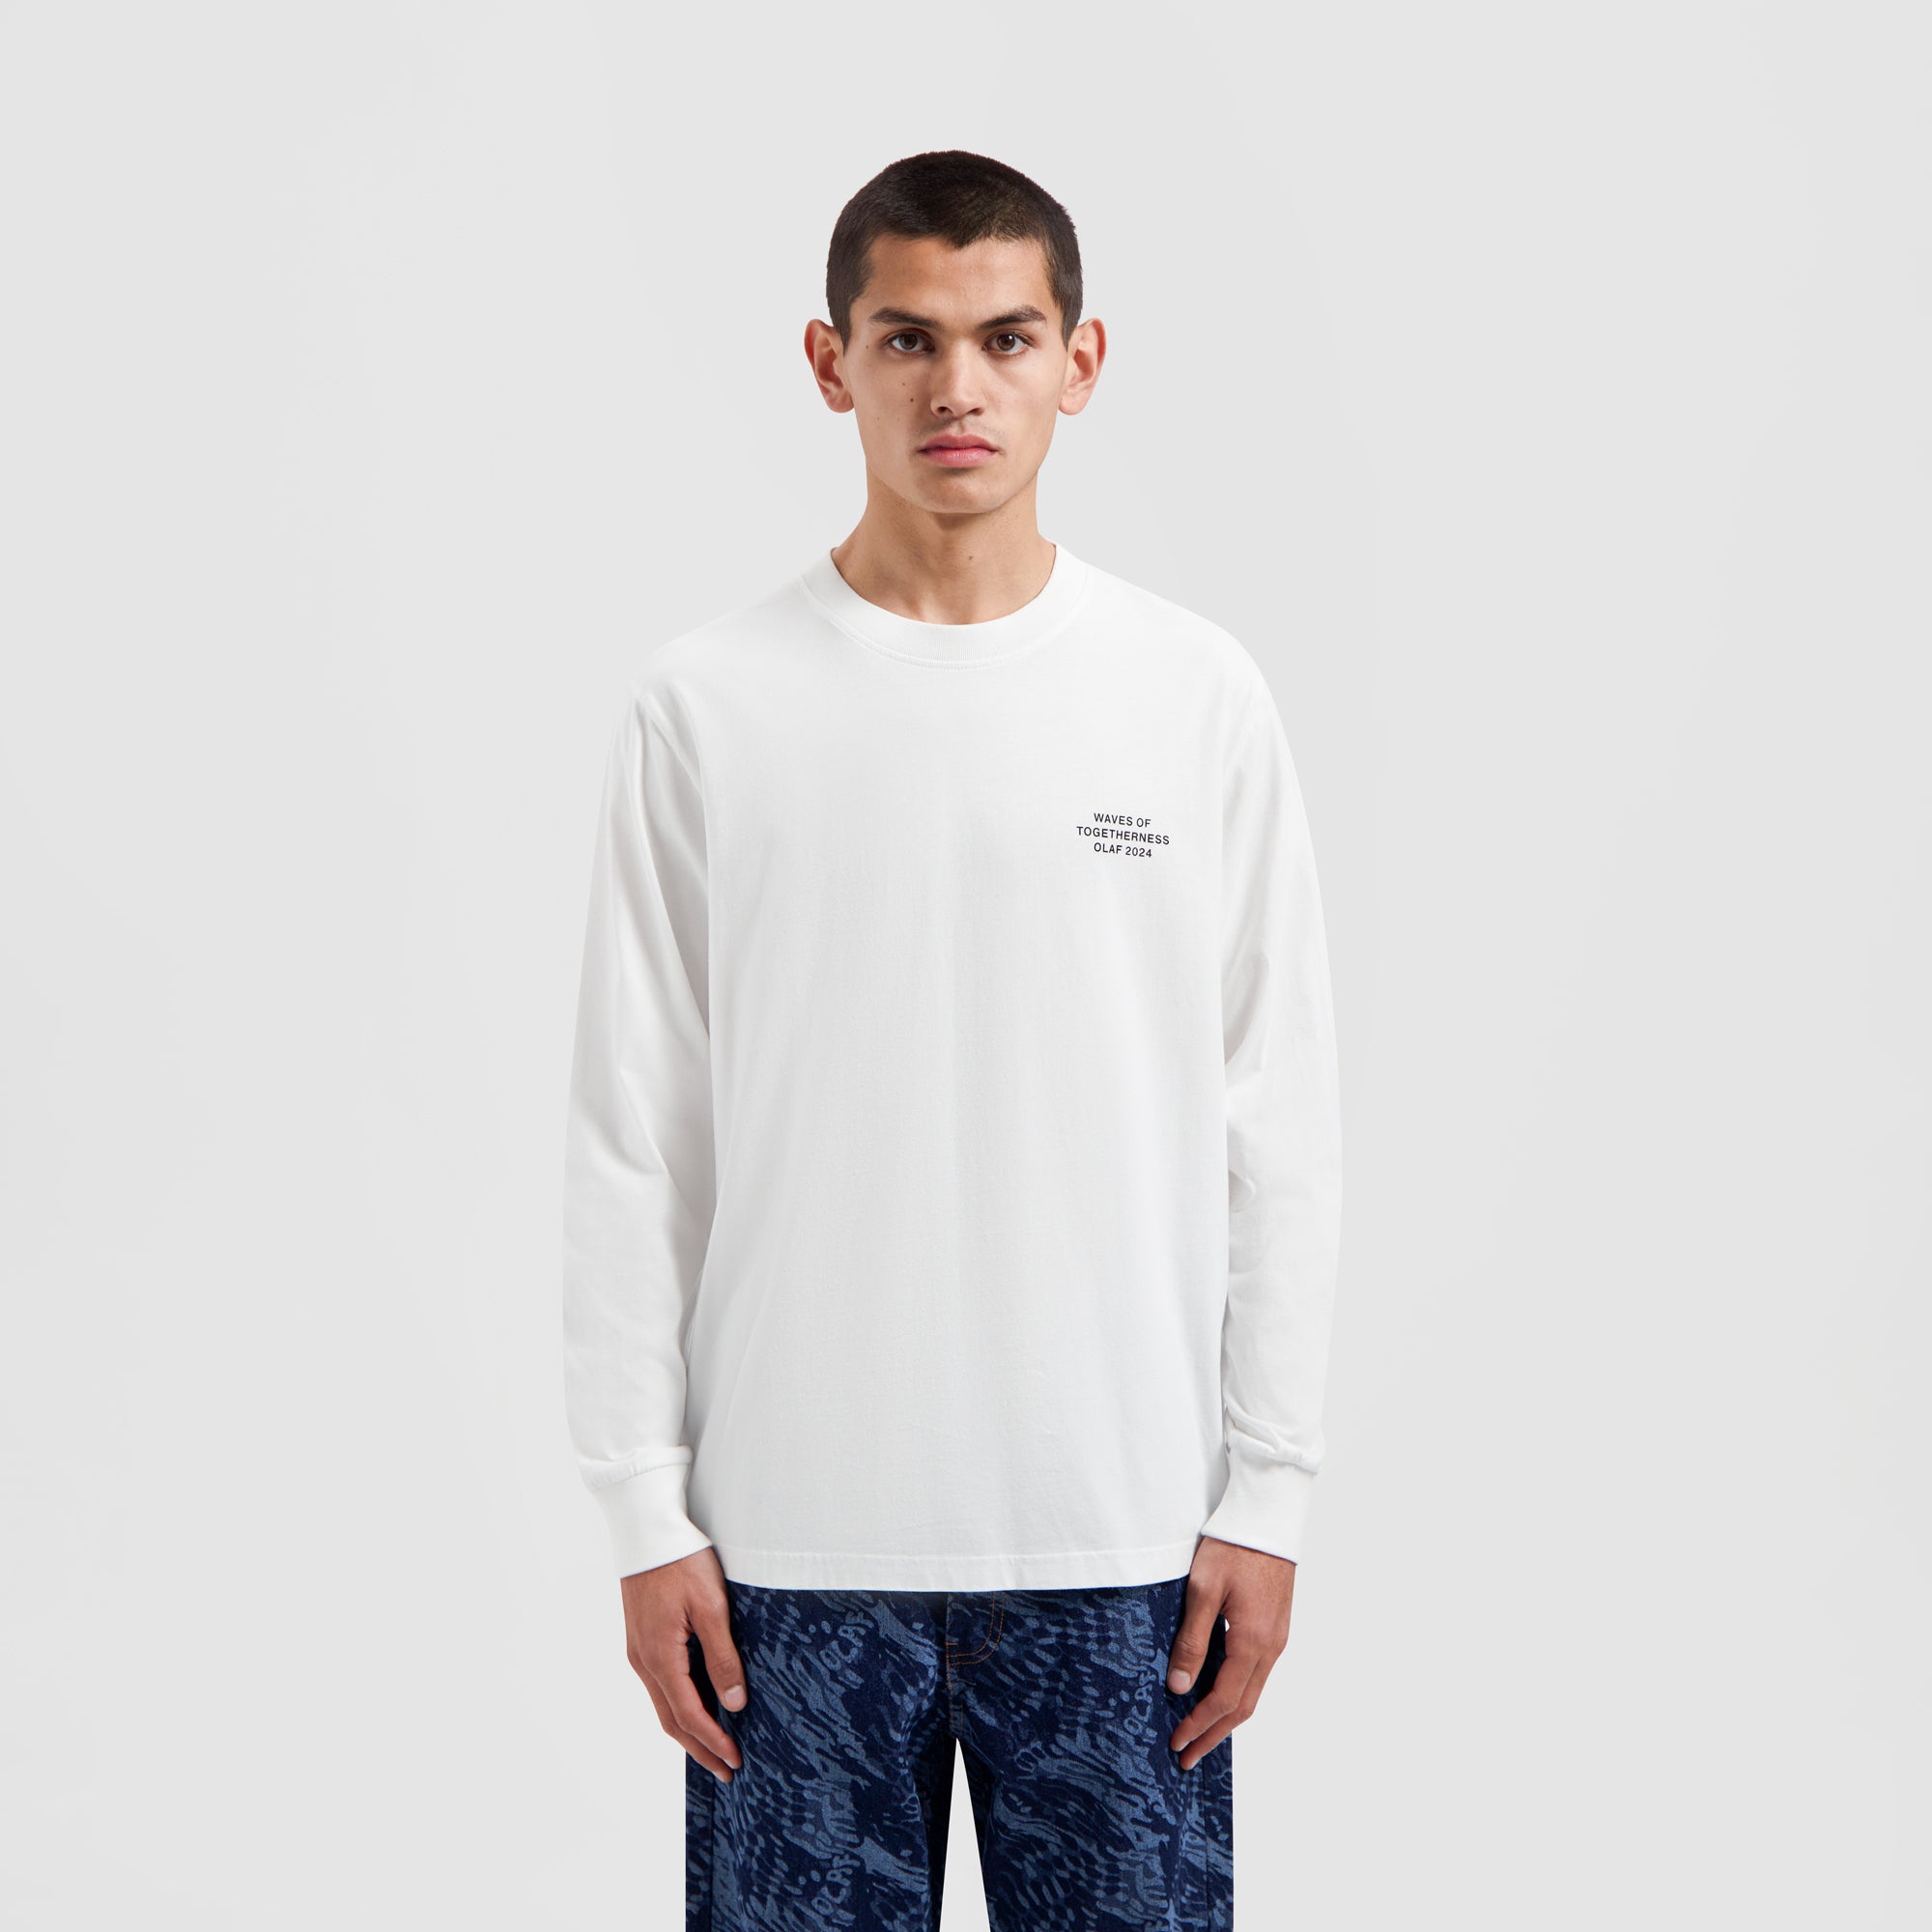 Waves Of Togetherness LS Tee - Optical White